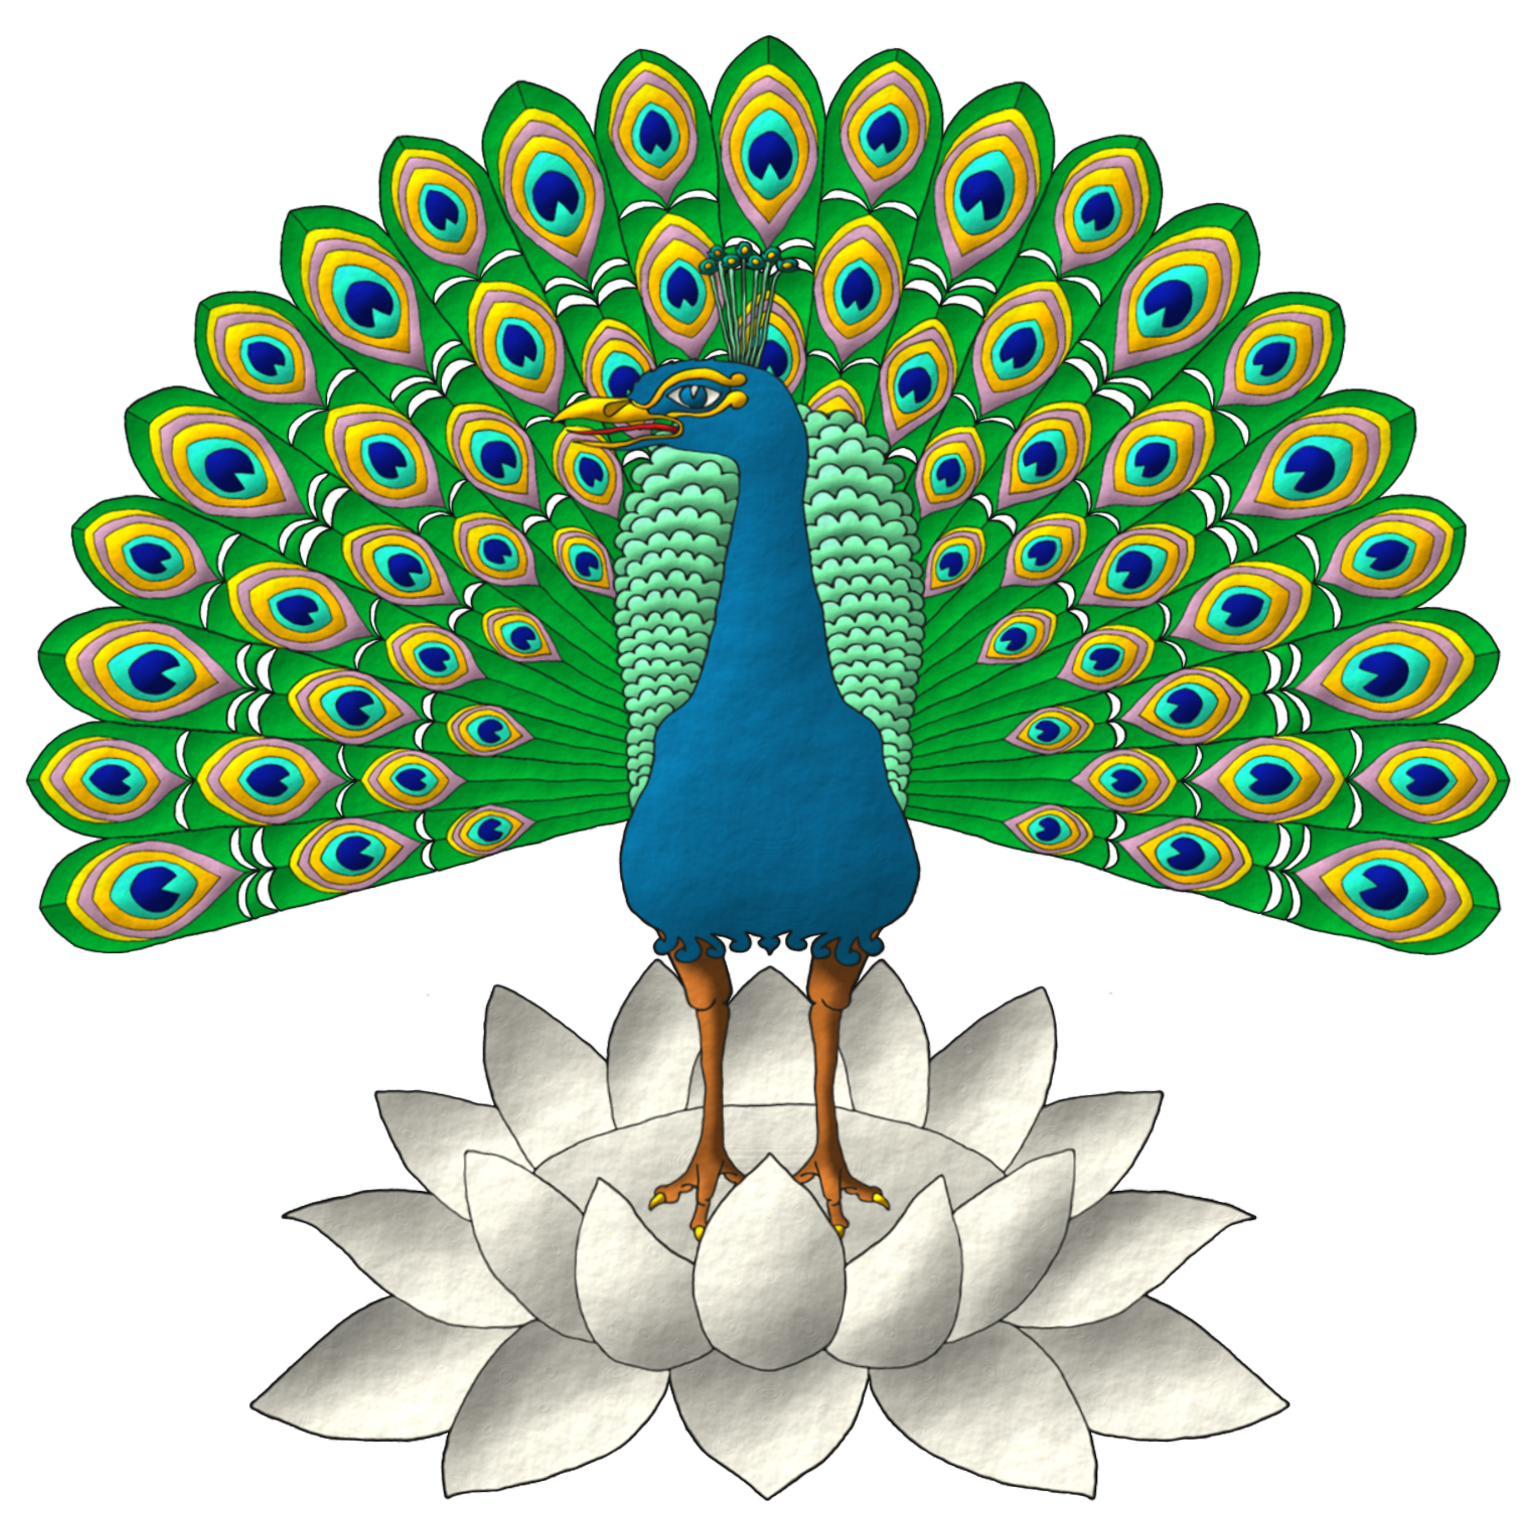 Heraldic badge of Ajay Gopal Valecha granted by the College of Arms and emblazoned by me. Blazon: Upon a lotto flower Argent a peacock in his splendour proper.